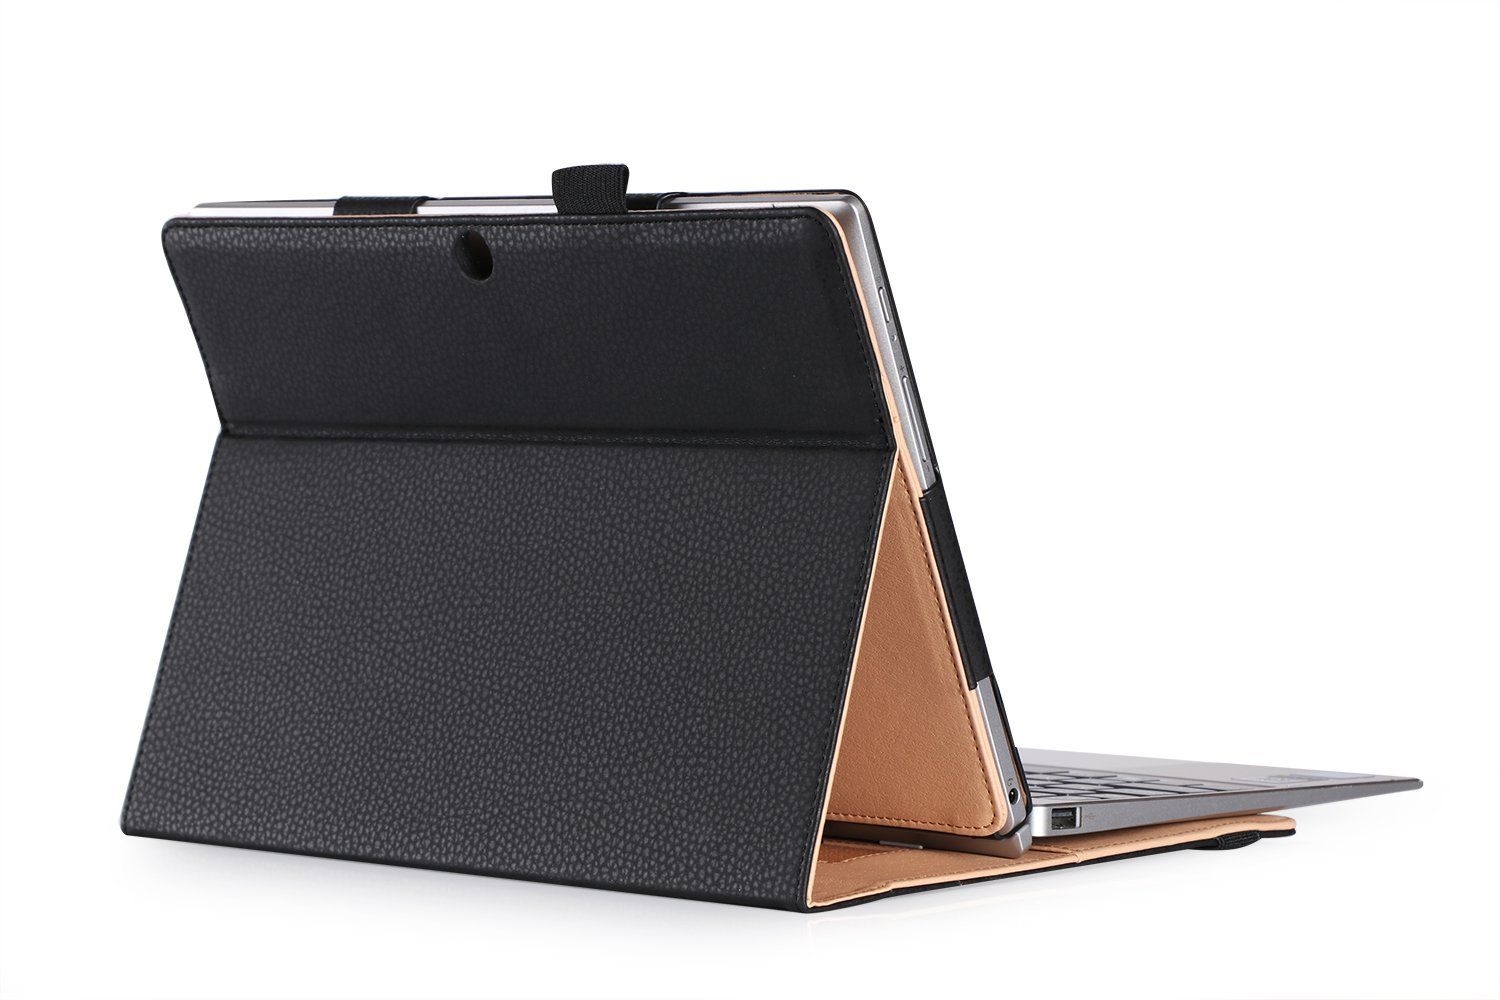 armourdog® folio case for the Lenovo Miix 320 in black with tan lining